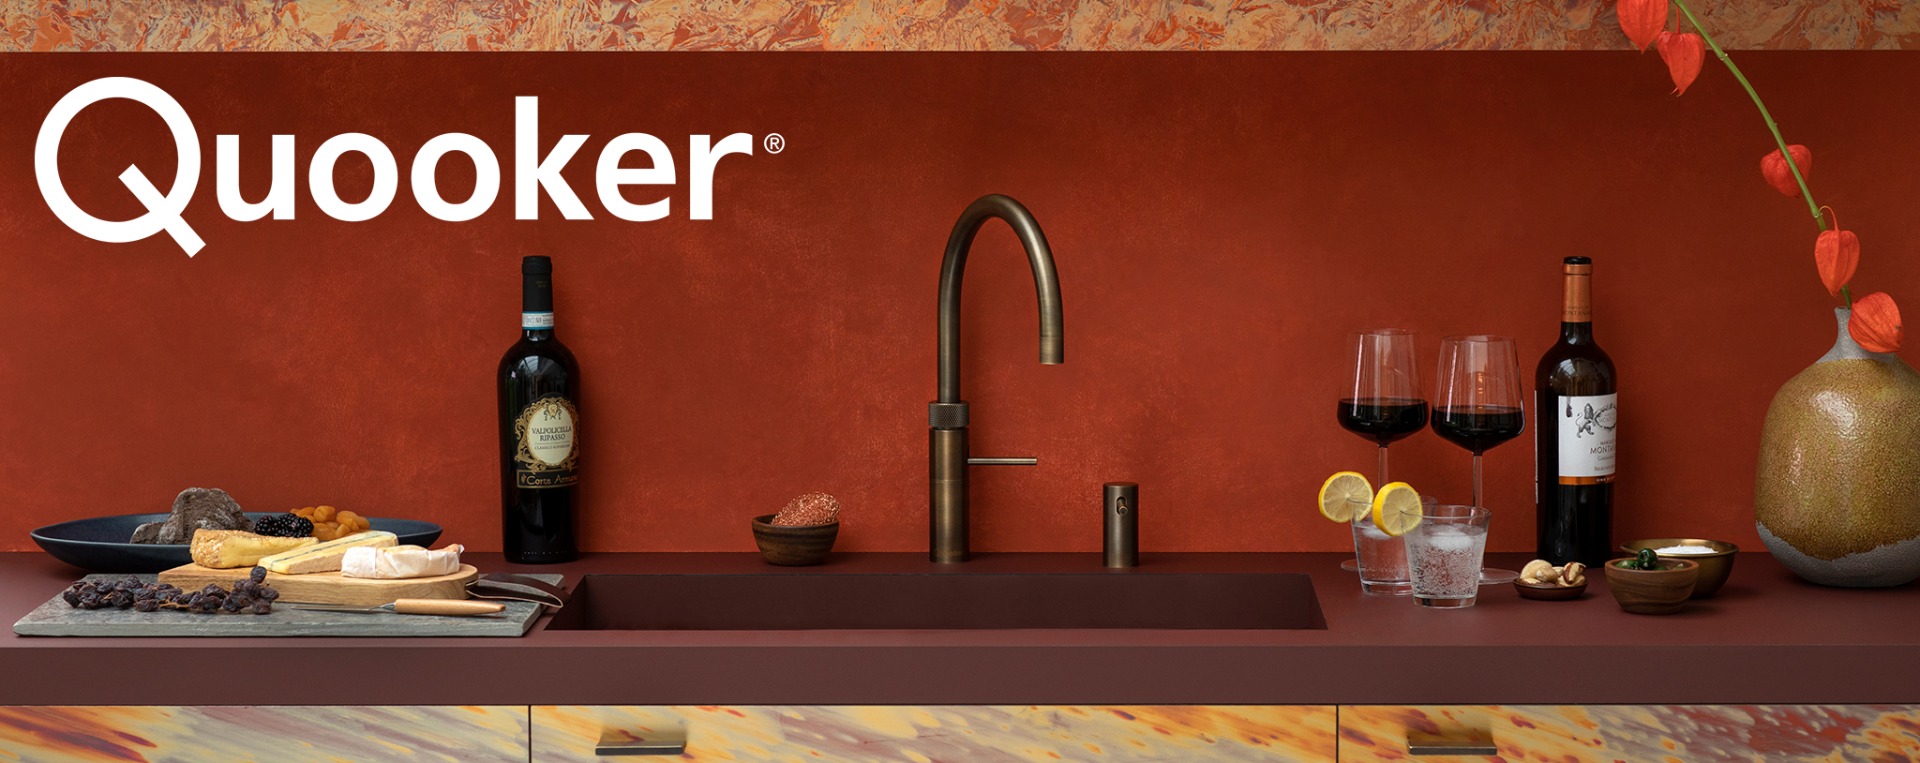 Quooker Information Page